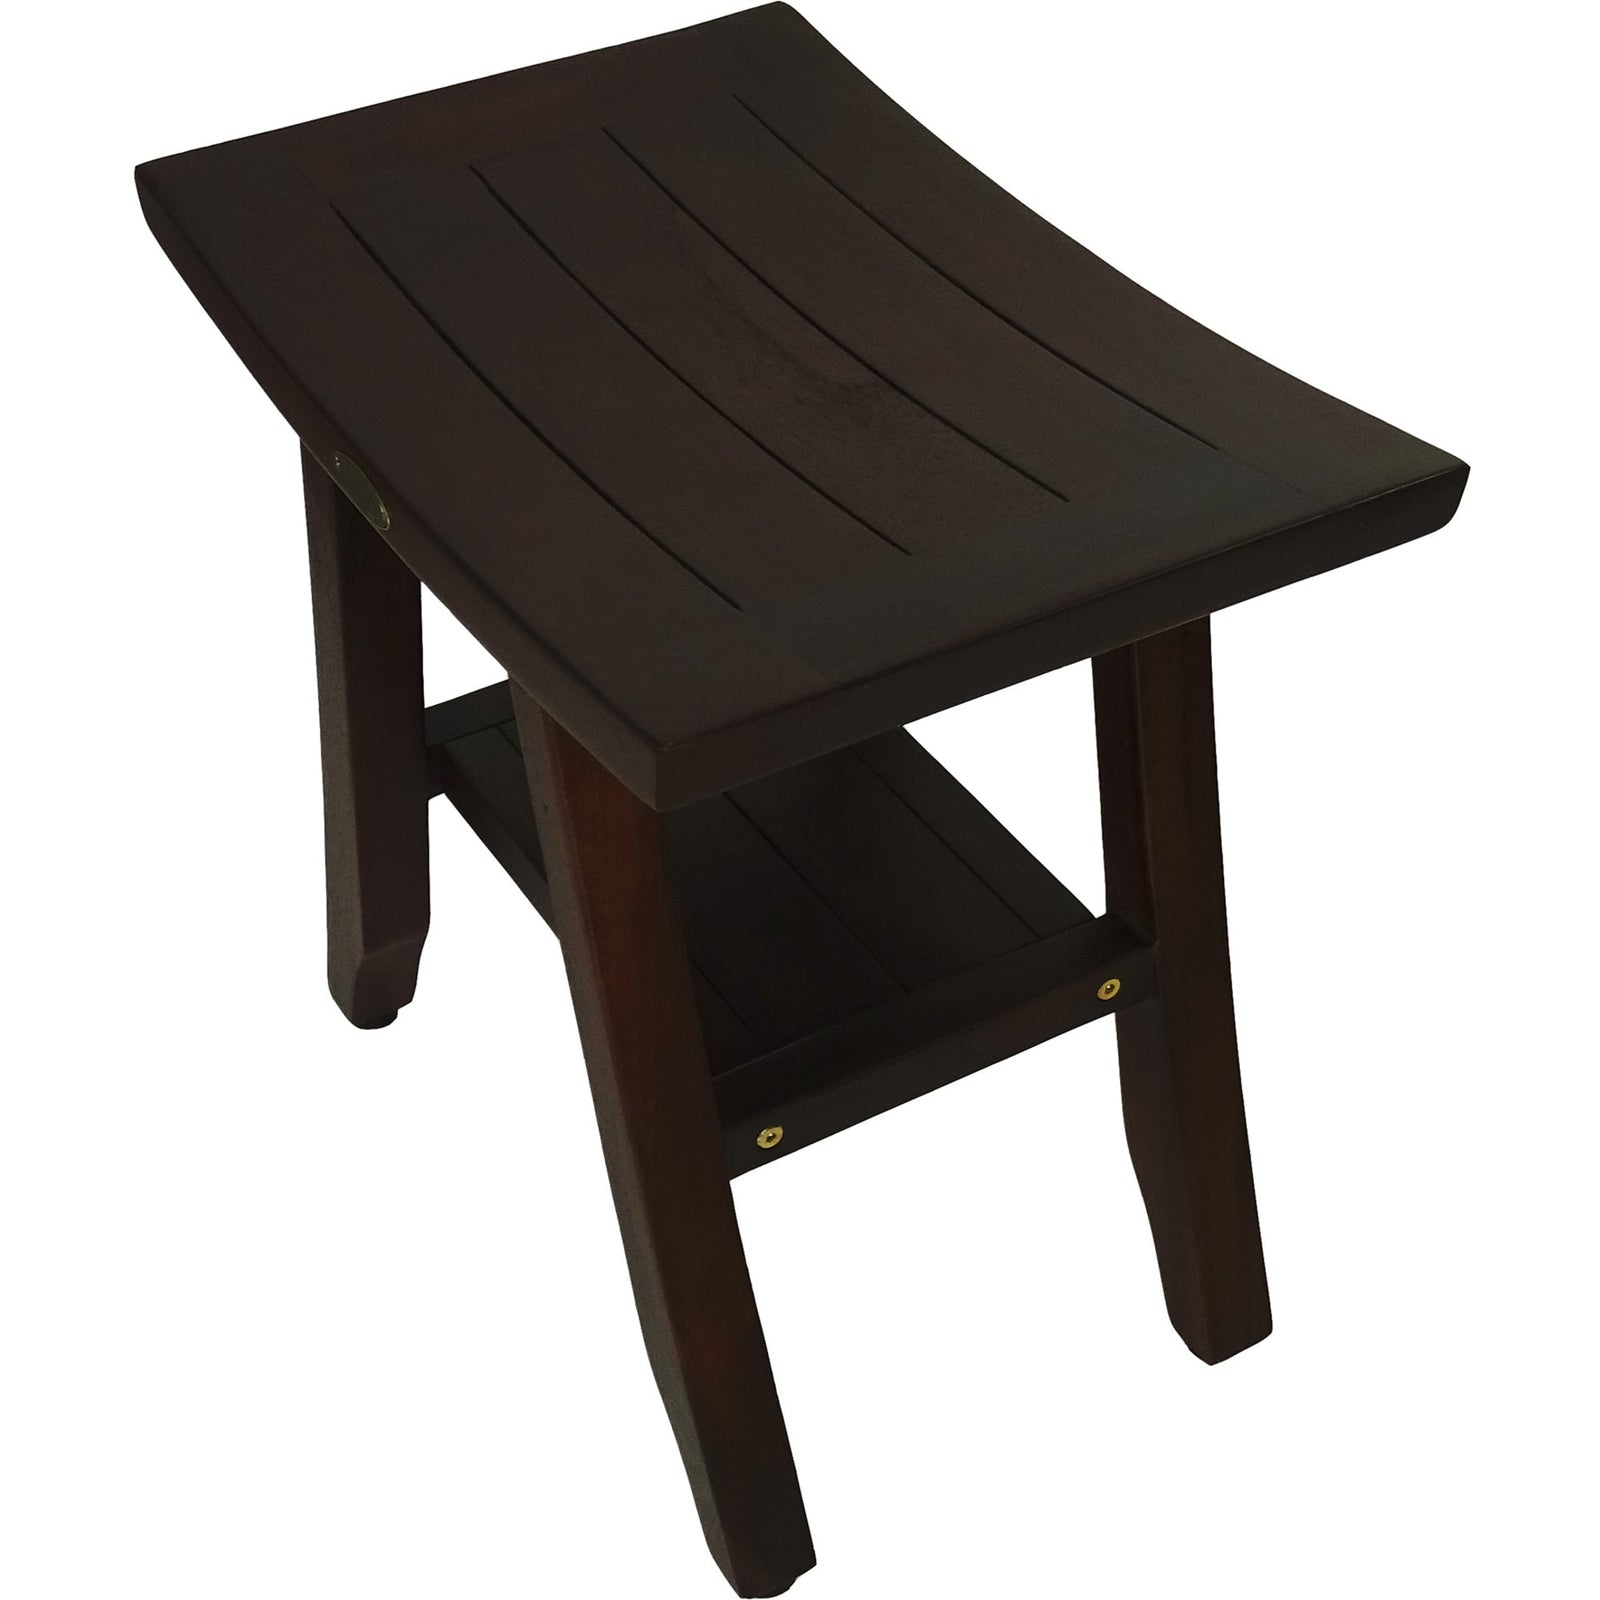 Compact Curvilinear Teak Shower or Outdoor Bench with Shelf in Brown Finish